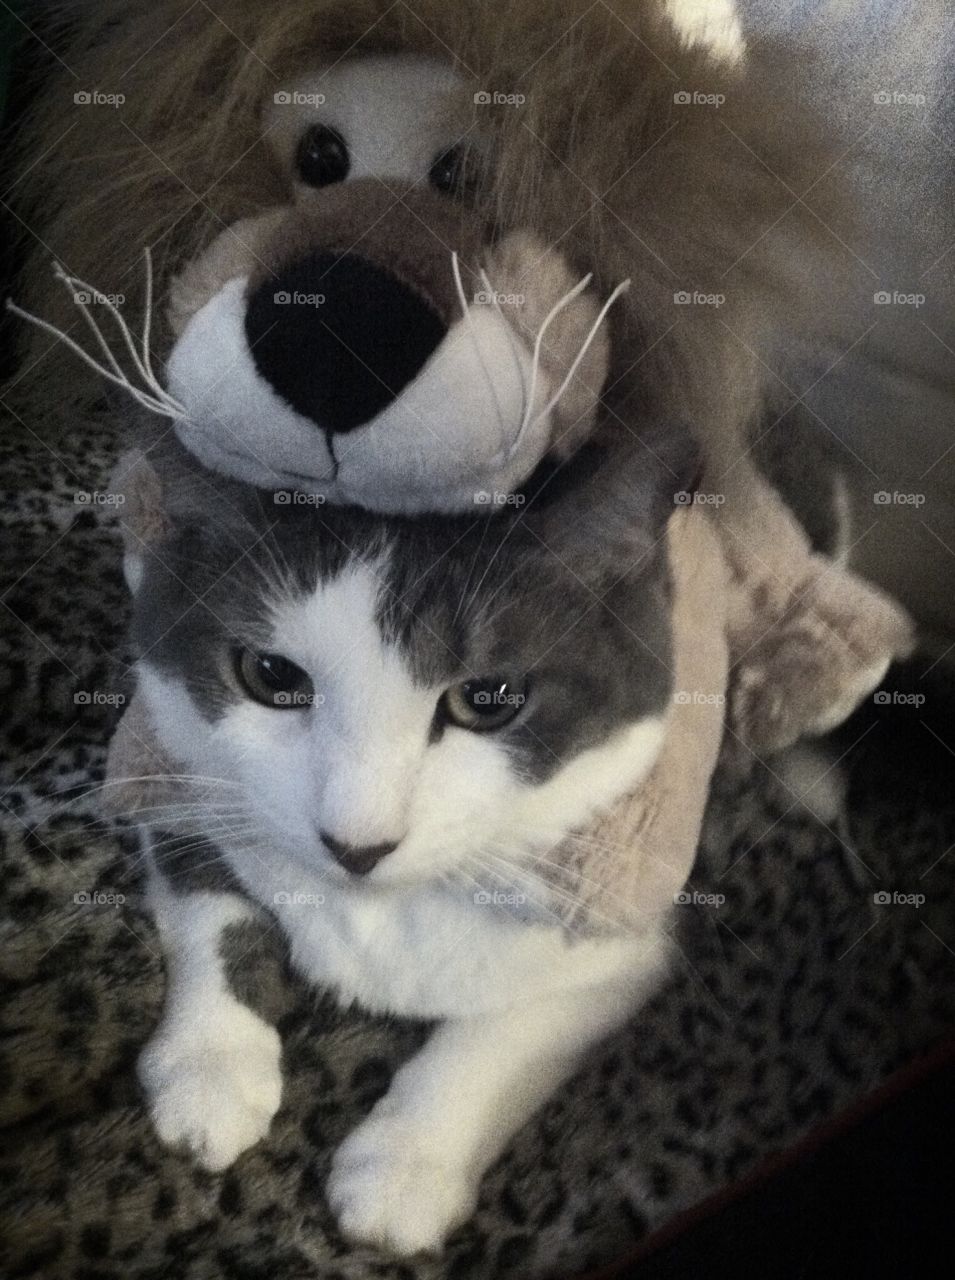 Cats wearing costumes